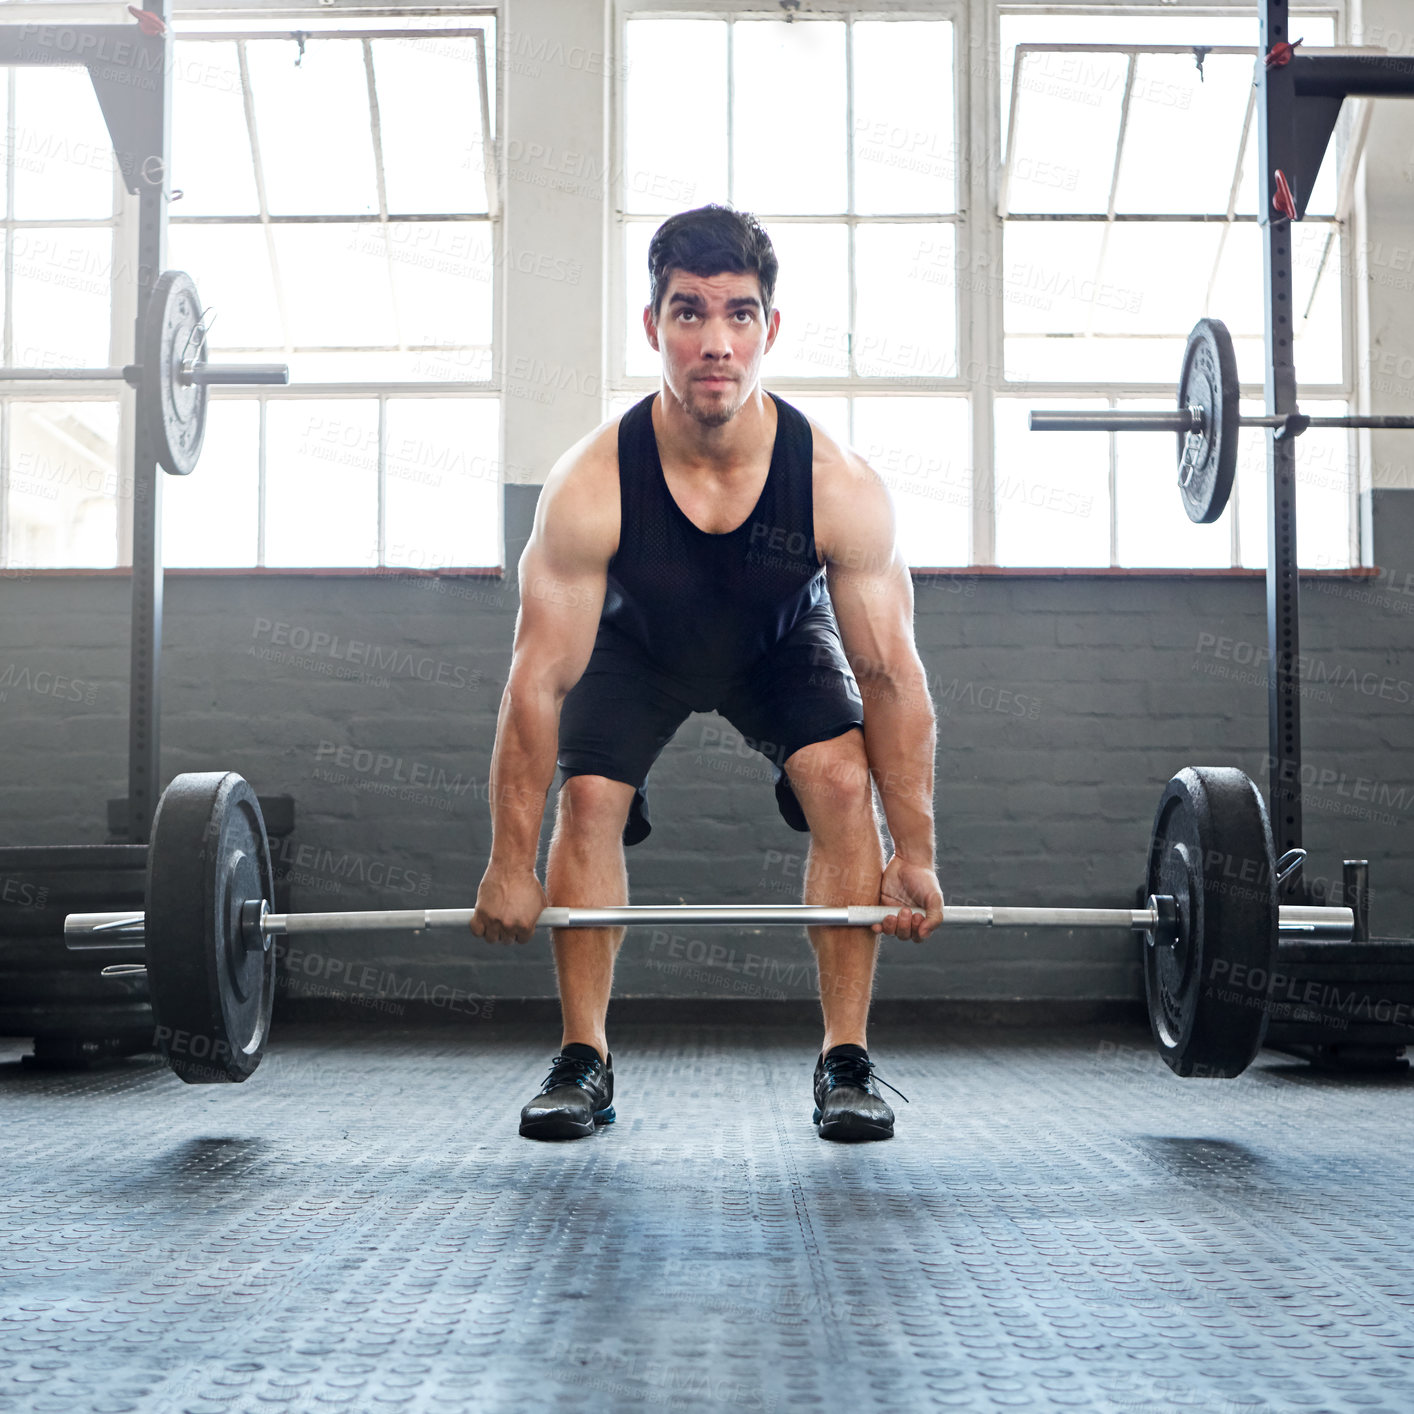 Buy stock photo Shot of a young man working out with weights in the gym